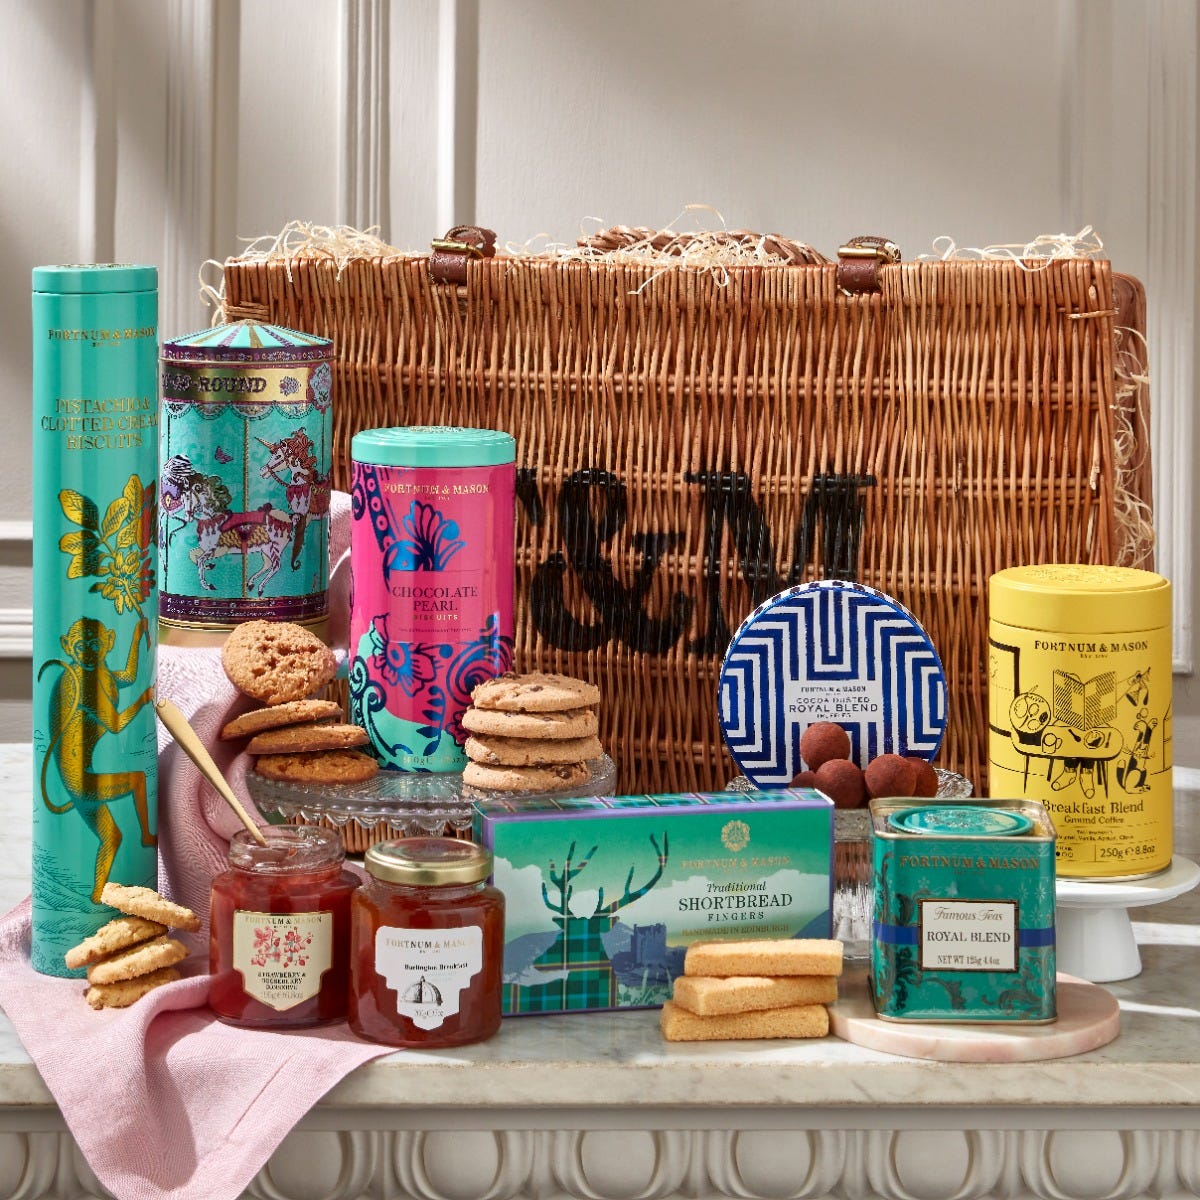 The Express Hamper, Biscuits, Teas, Preserves, Coffee, Condiments, Fortnum & Mason